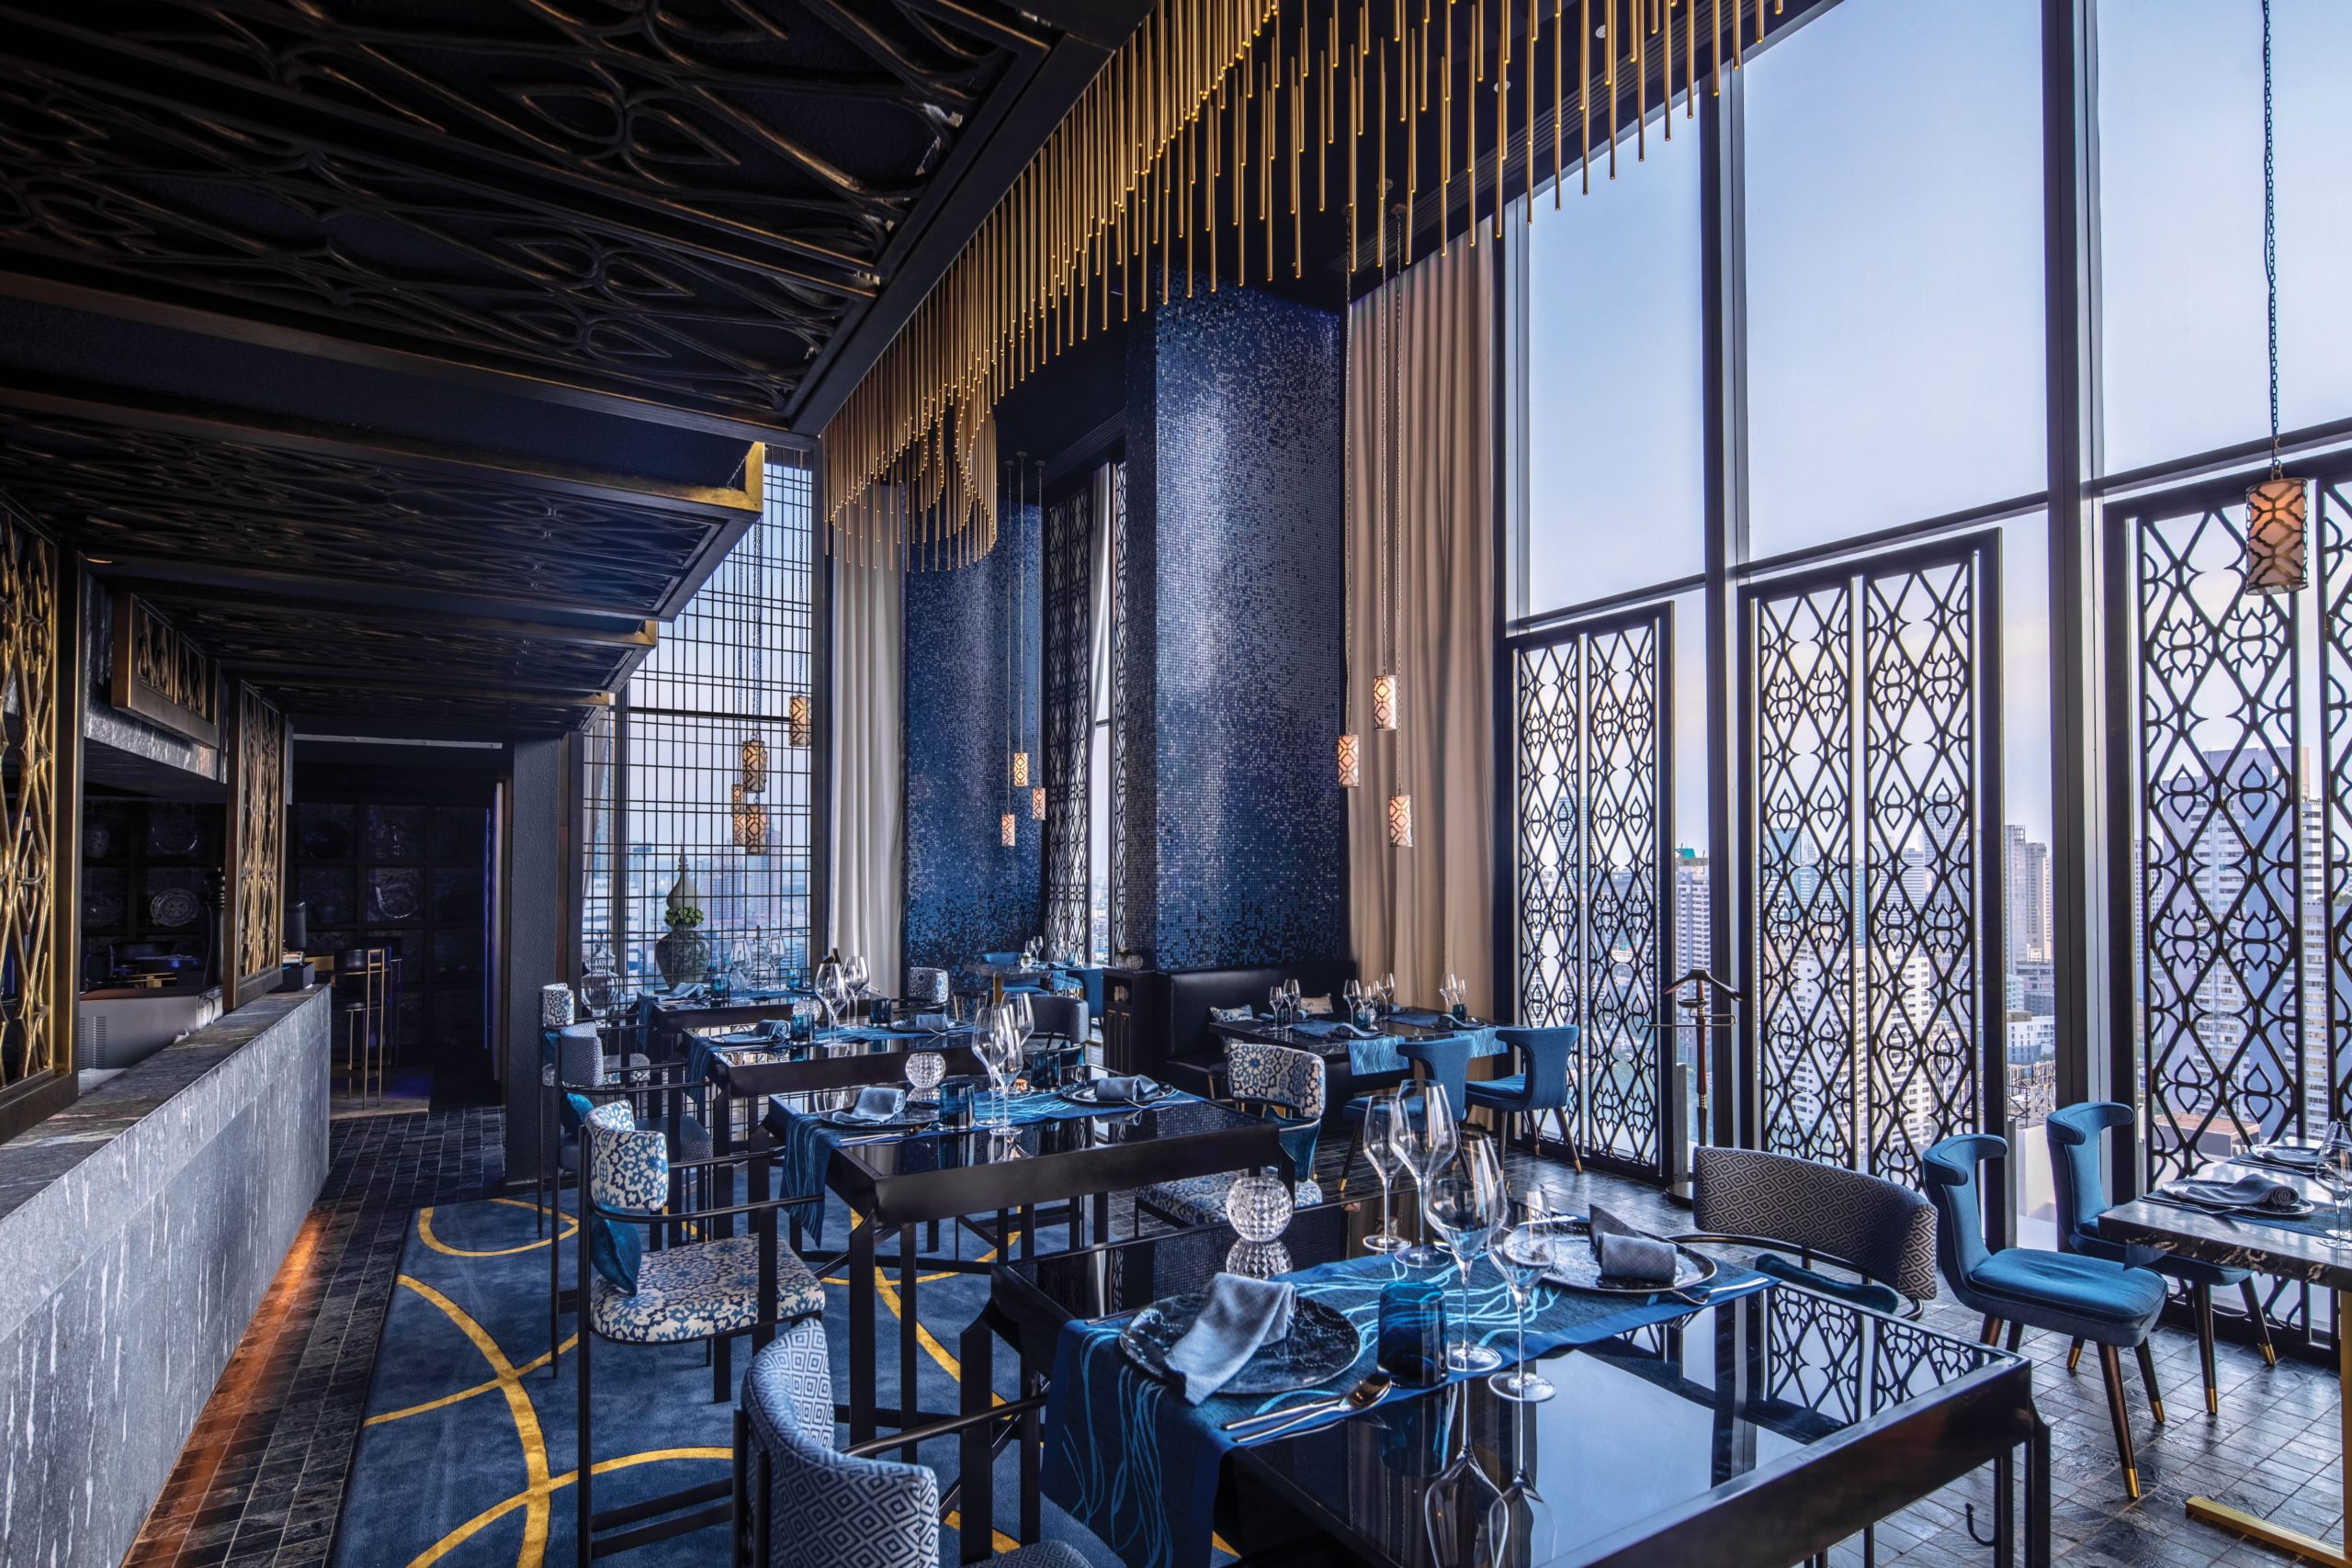 One of the most innovative hotels in the Thai capital, 137 Pillars Suites & Residences Bangkok combines the timeless grace of the group’s iconic Chiang Mai property with an unashamedly contemporary urban flare.